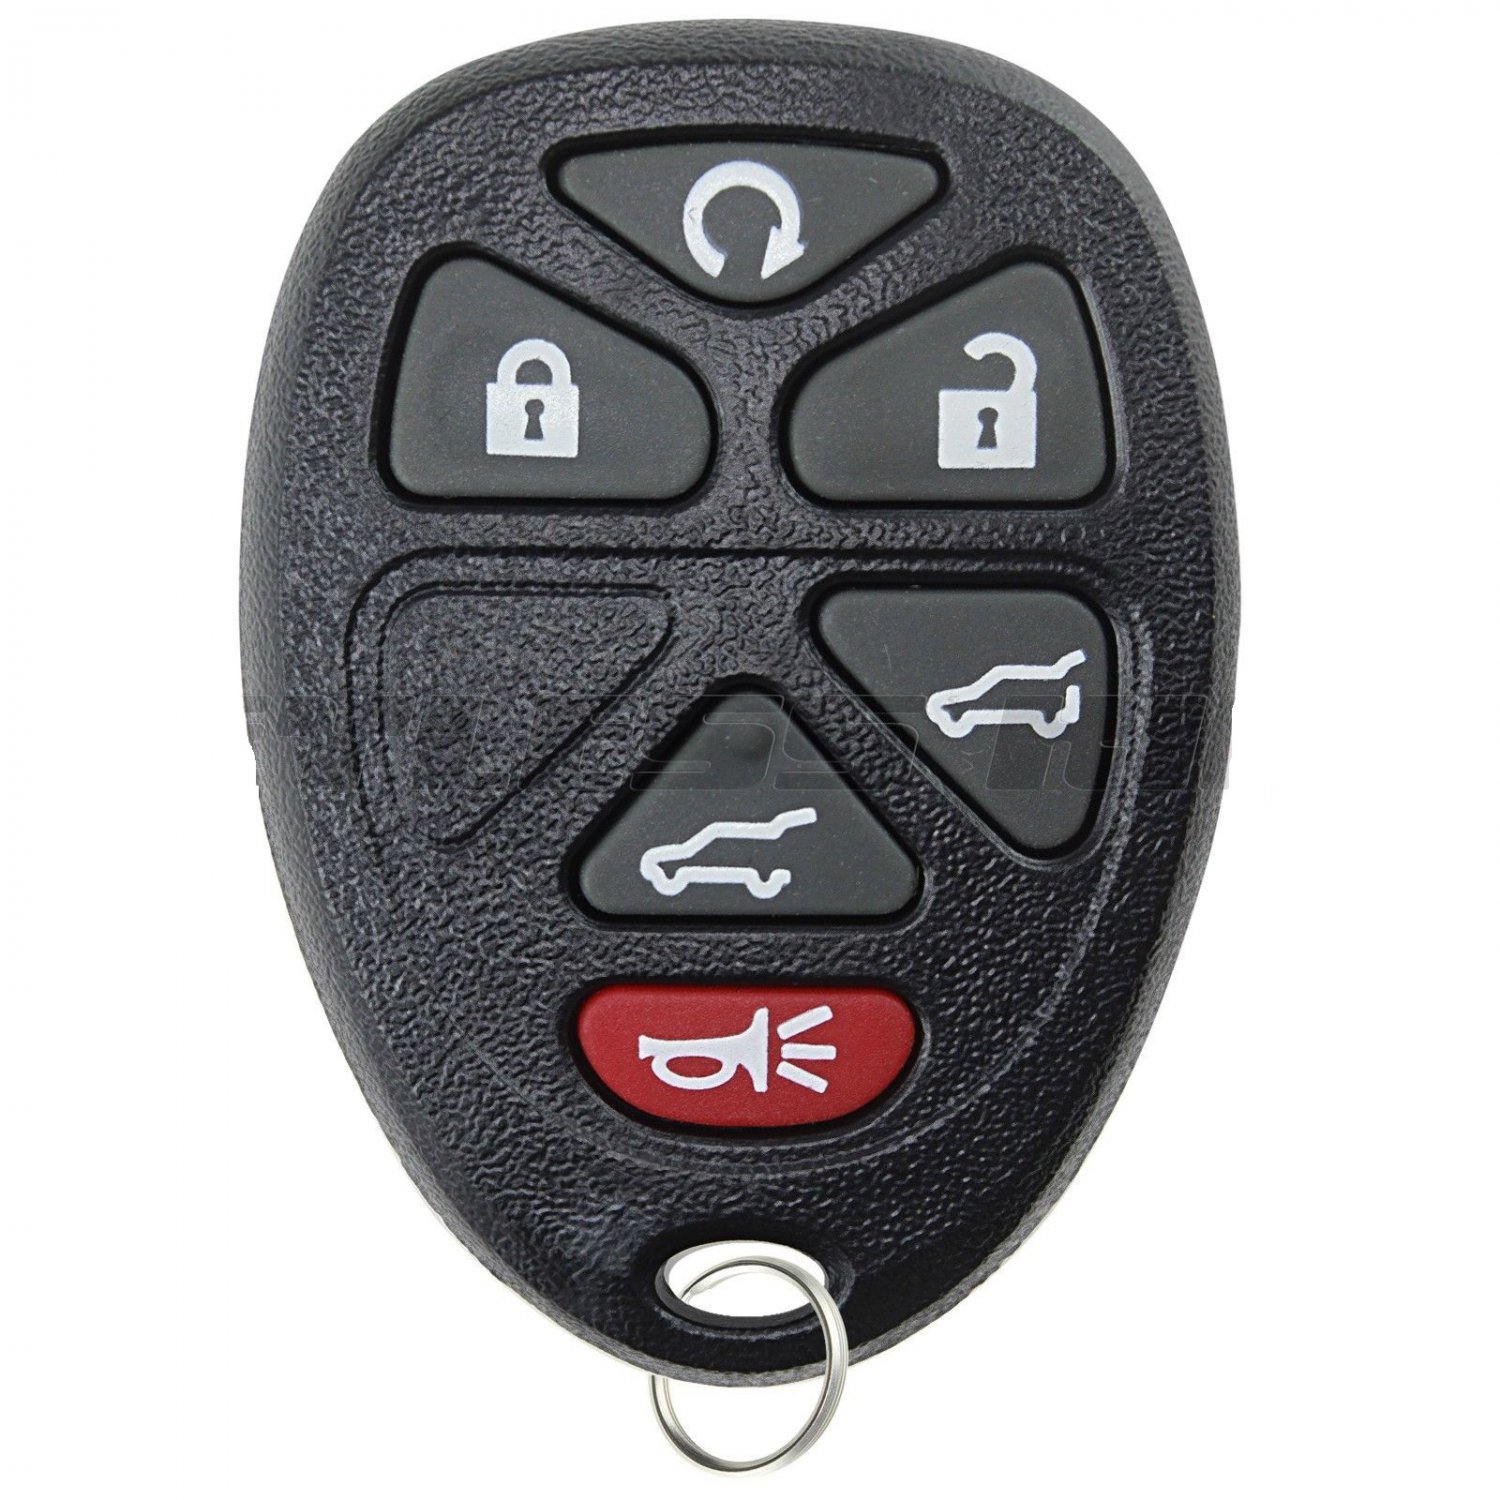 The 14+ Hidden Facts of Kia Remote Start Fob! We have oem kia remote